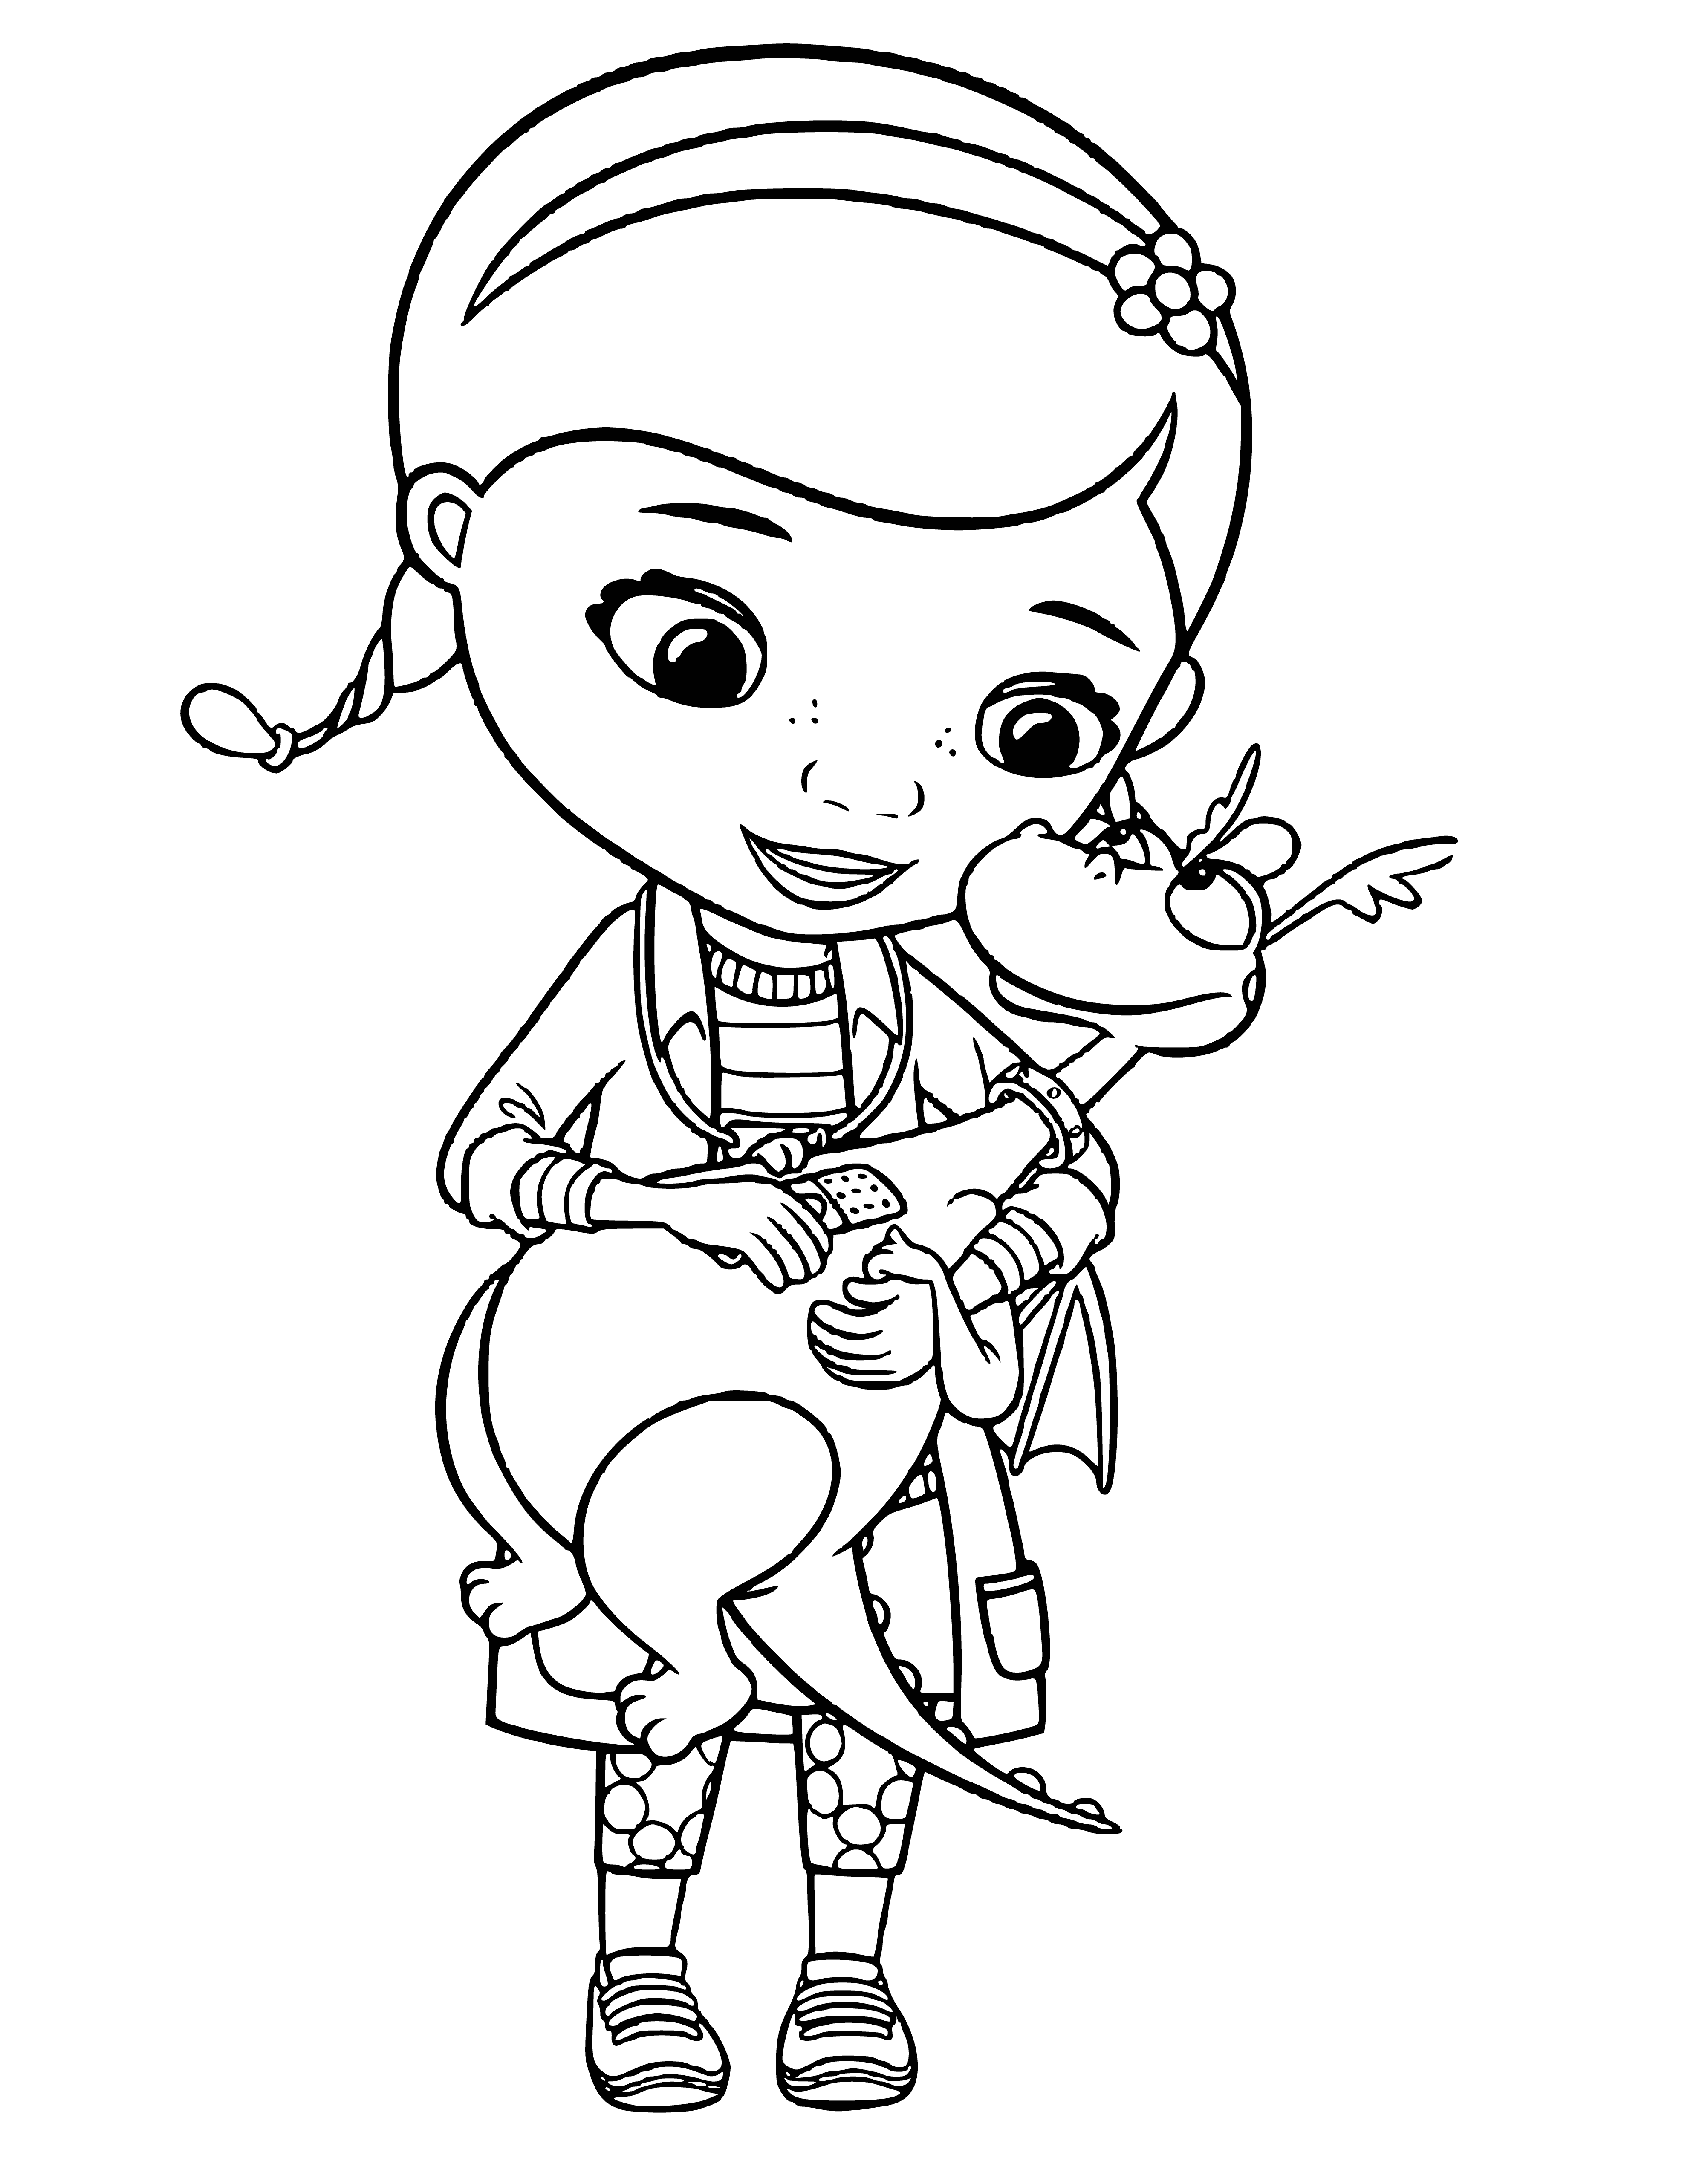 Dotti and Staffi coloring page